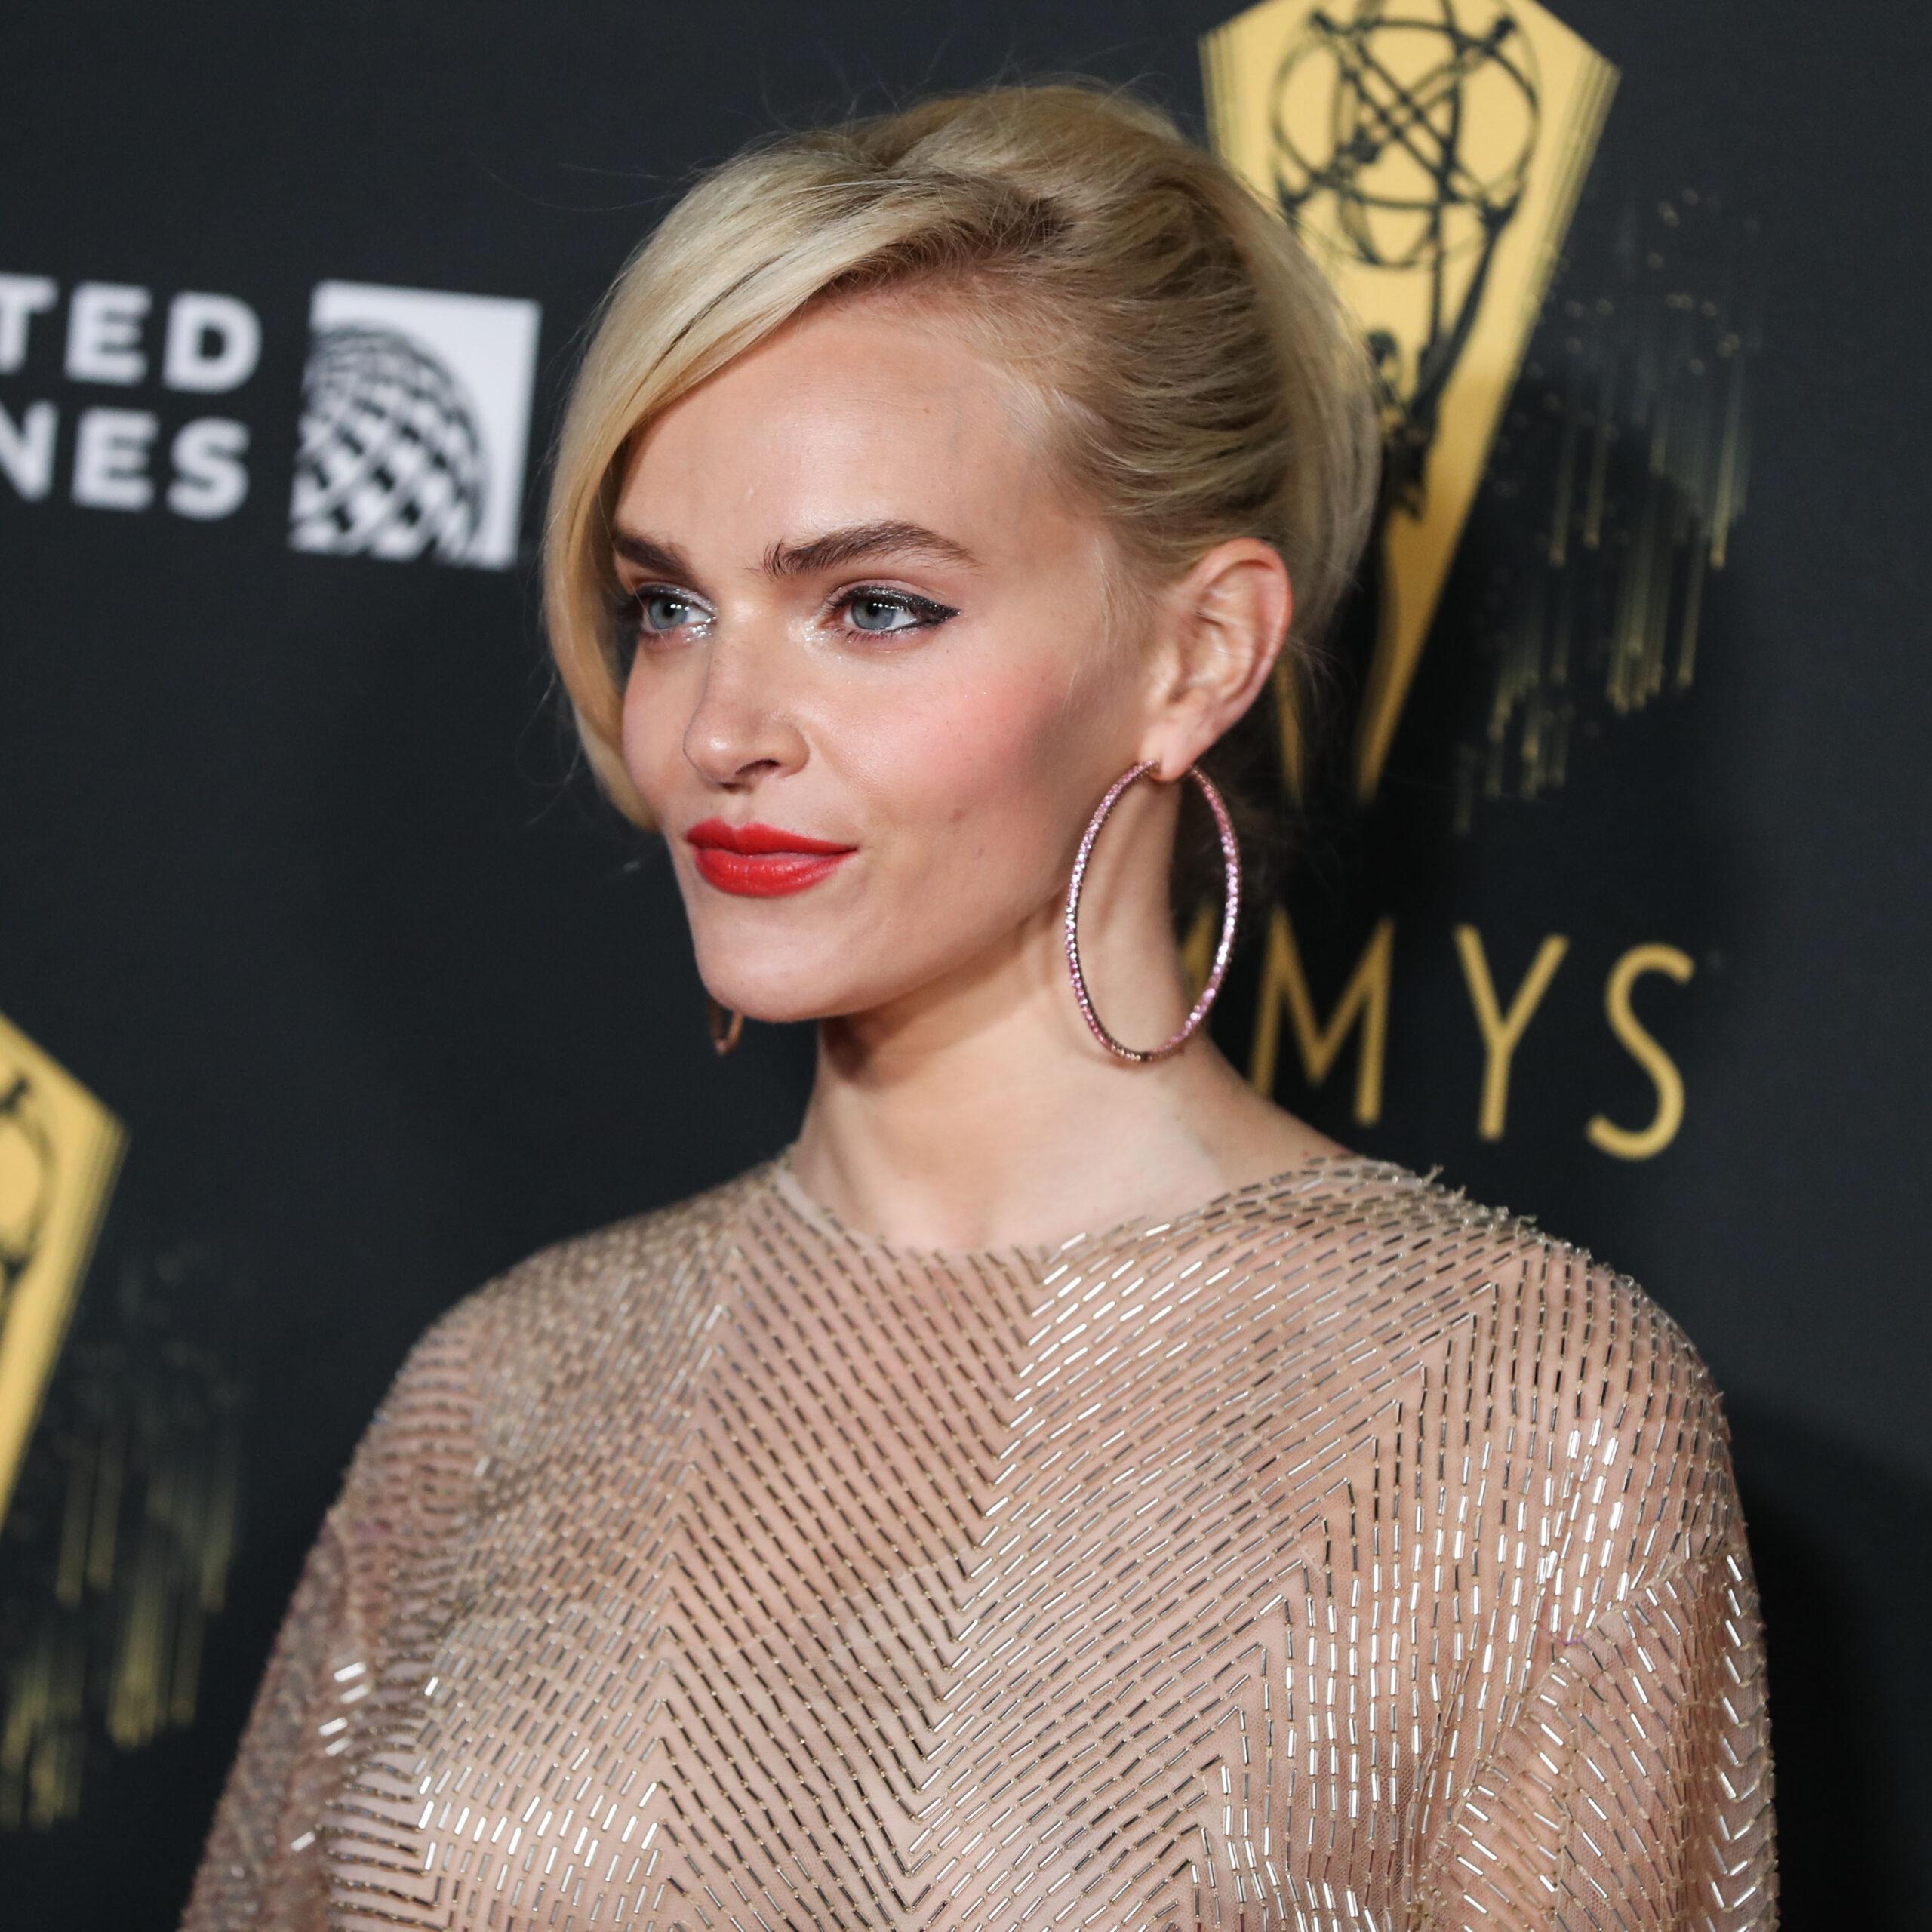 Madeline Brewer wearing a Valentino dress, Alexandre Birman shoes and Kallati earrings arrives at the Television Academy's Reception To Honor 73rd Emmy Award Nominees